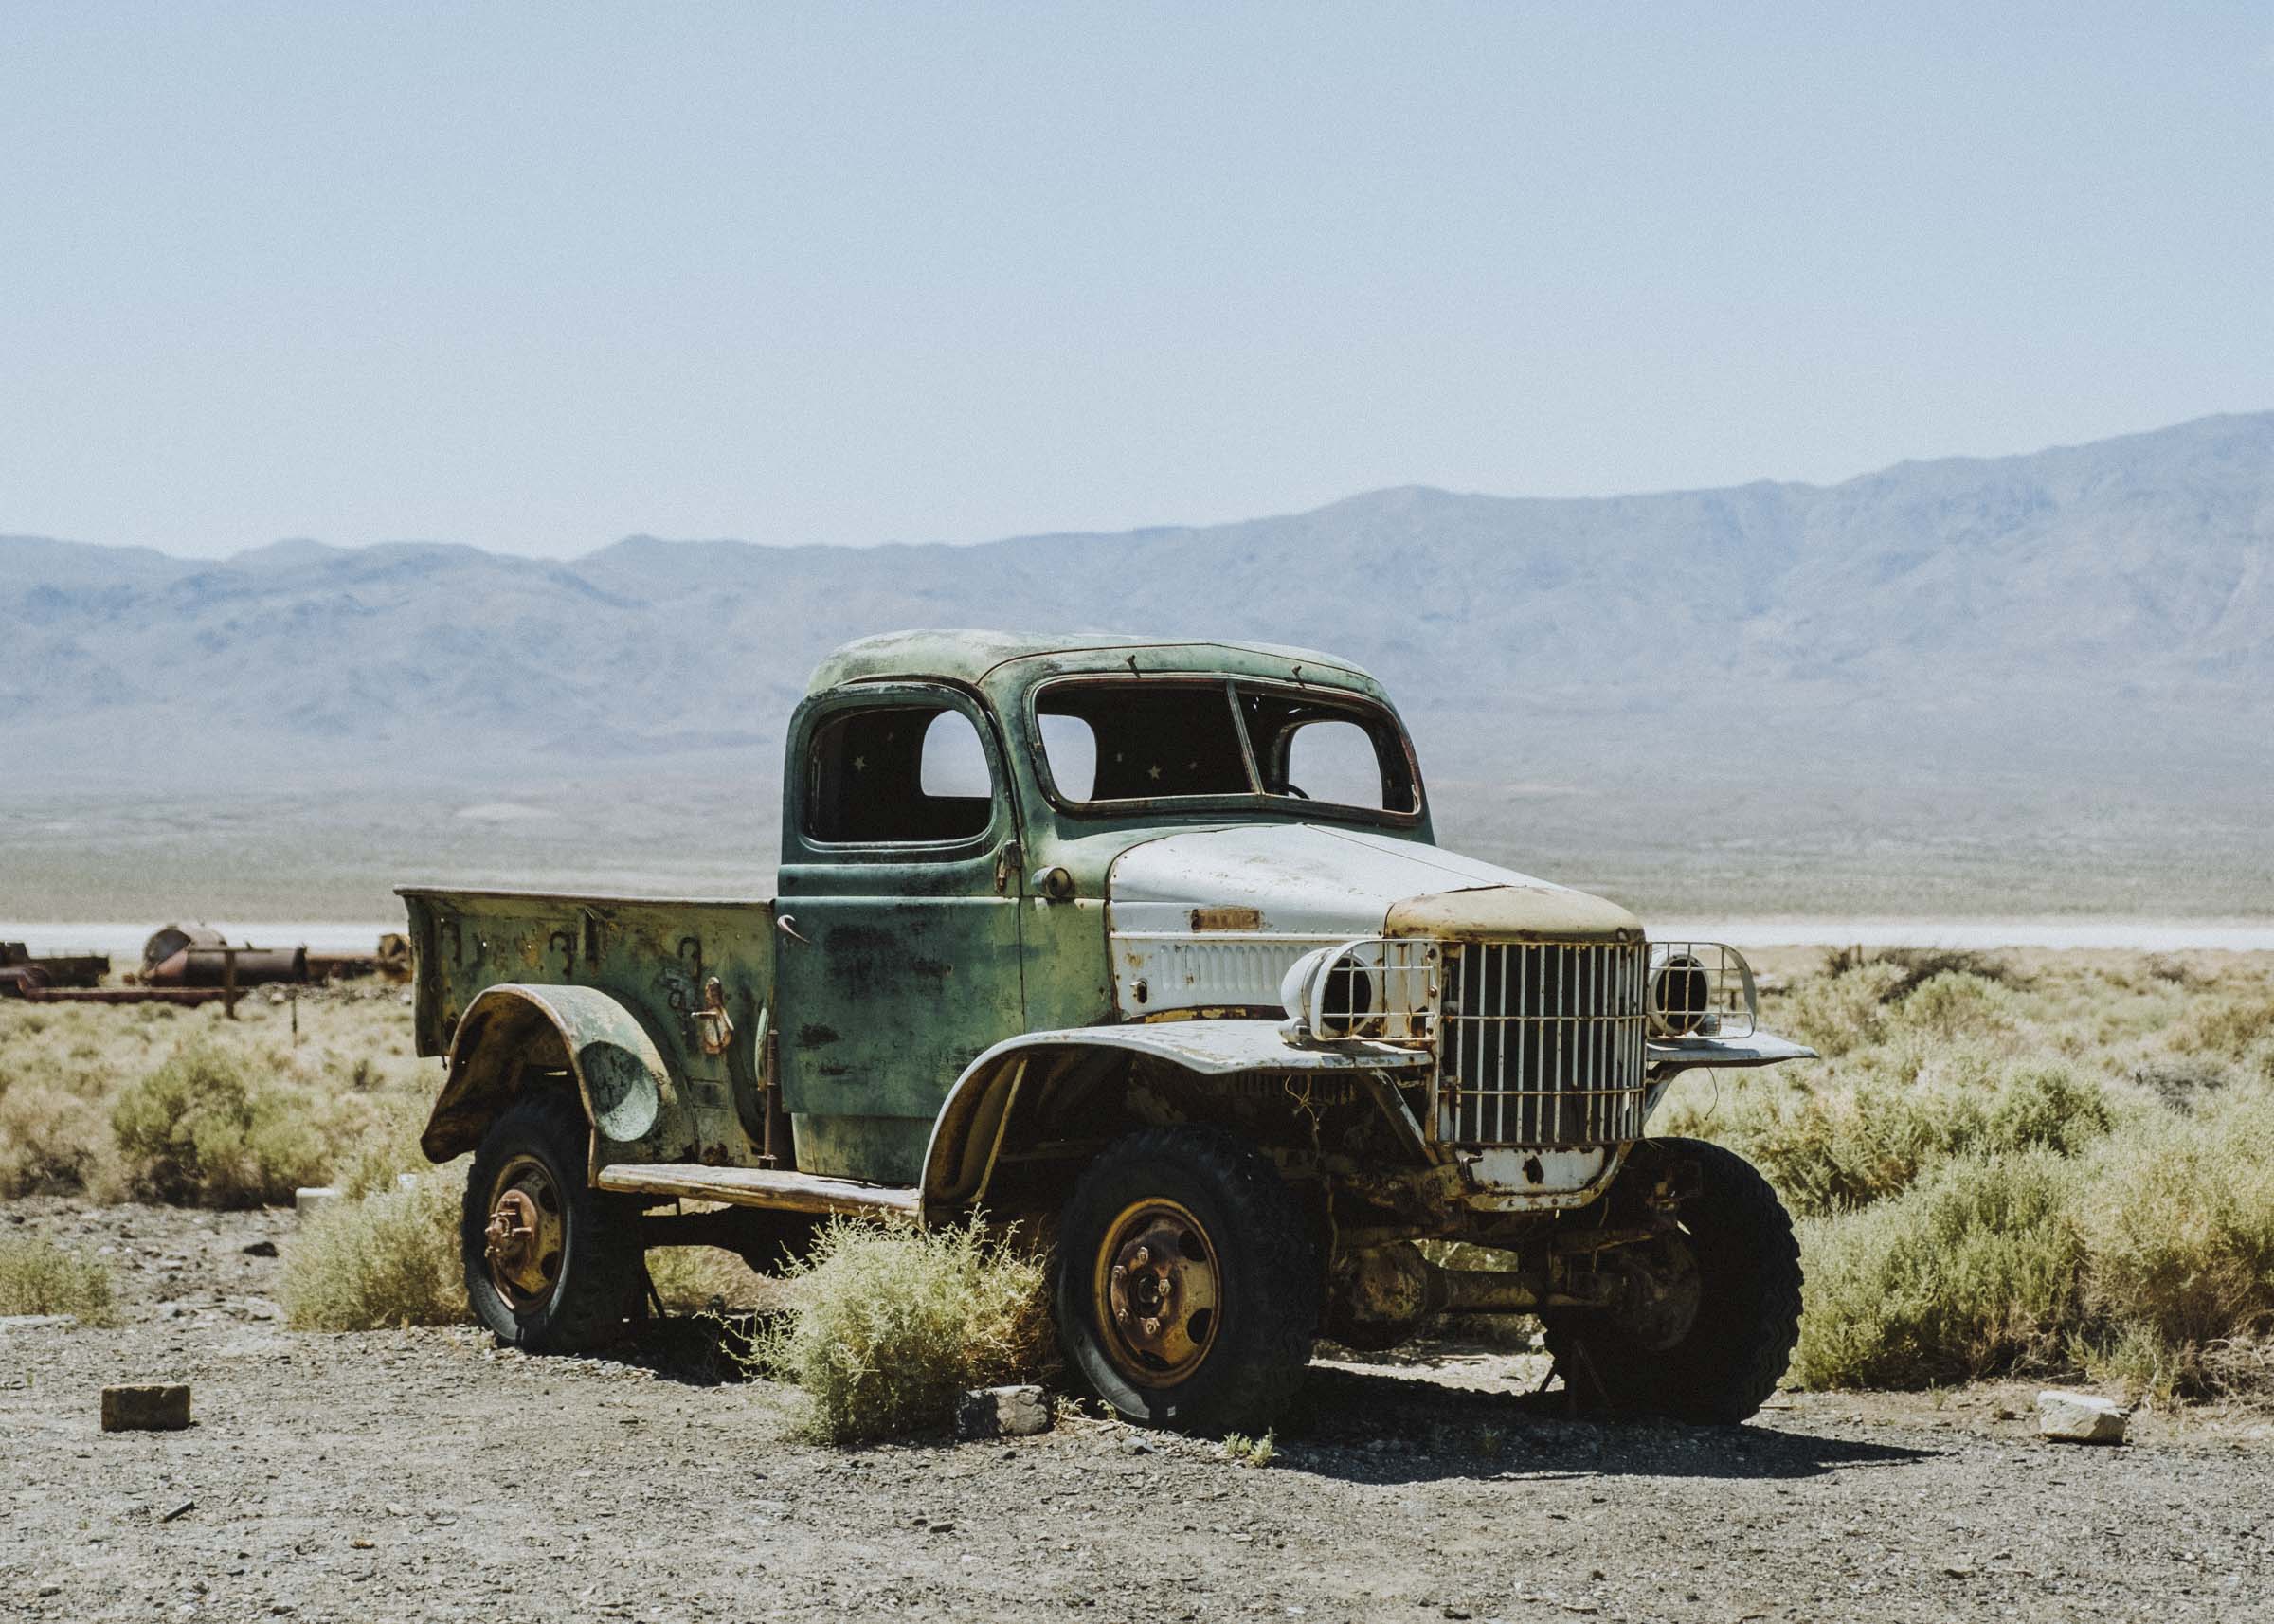 An old truck abandoned in the desert of Death Valley